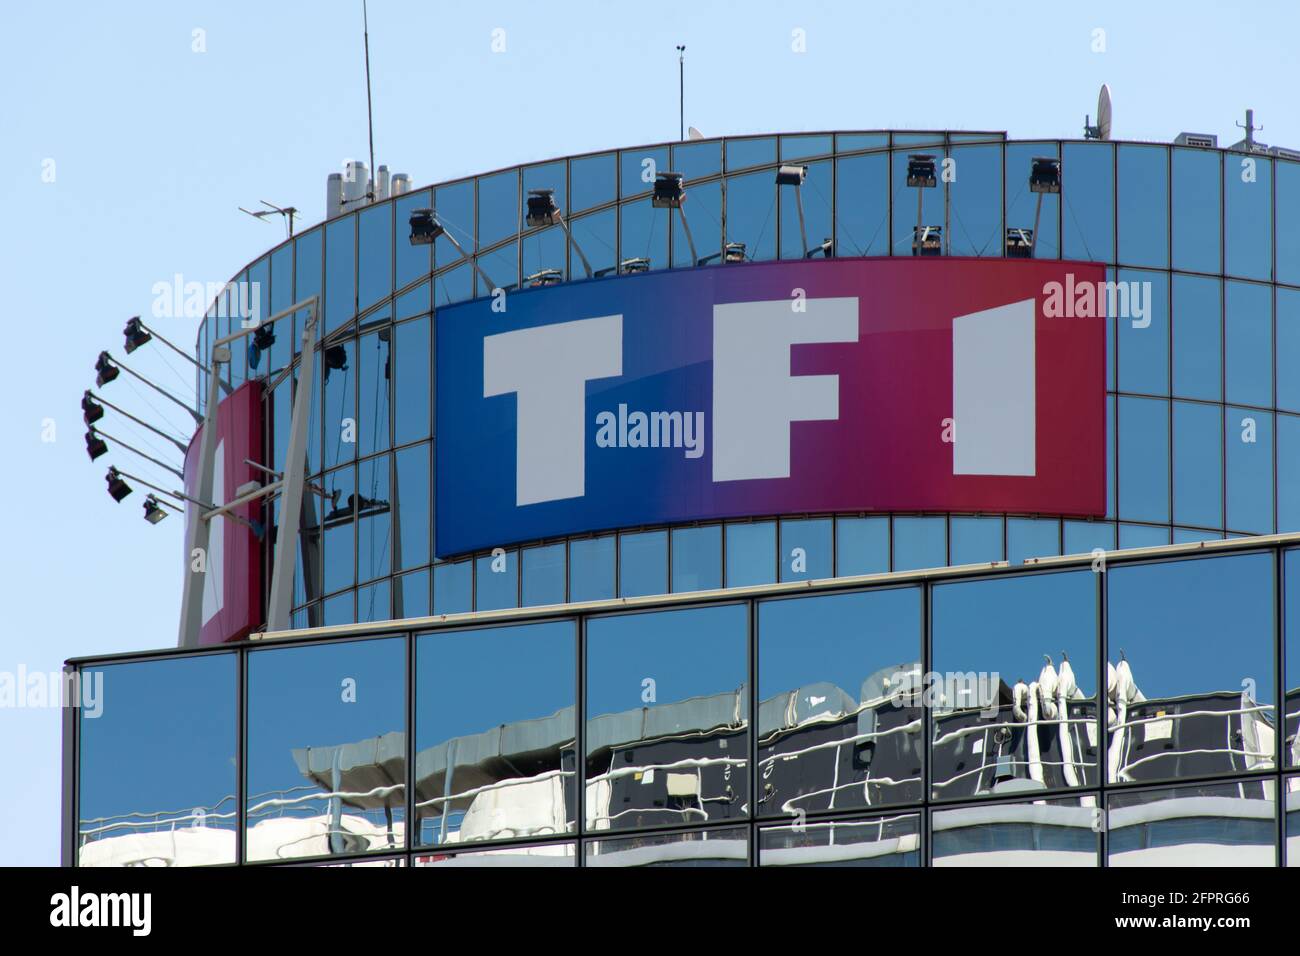 Exterior view of the headquarters of the TF1 group. TF1, a subsidiary of the Bouygues group, is the leading French television channel Stock Photo